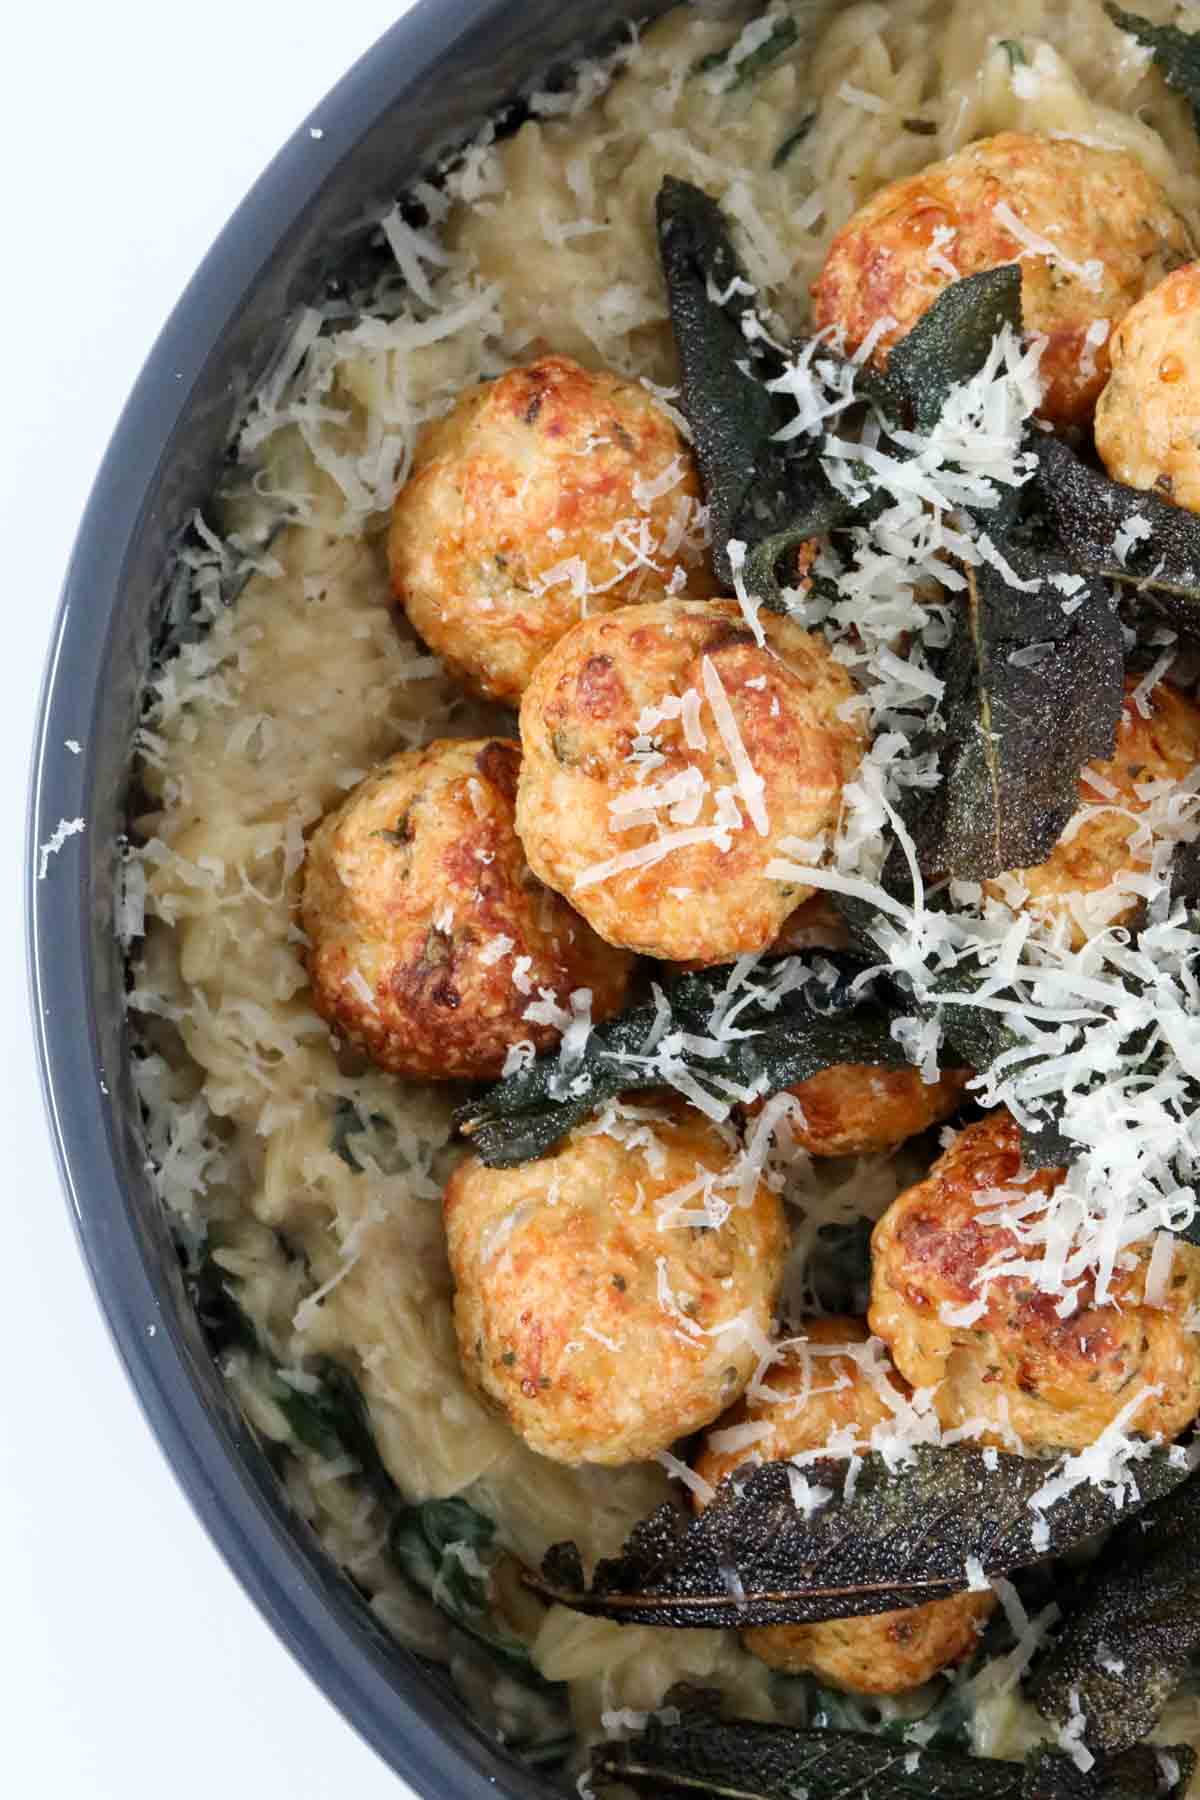 Baked chicken meatballs served on a bed of creamy risoni with finely grated parmesan sprinkled on top.